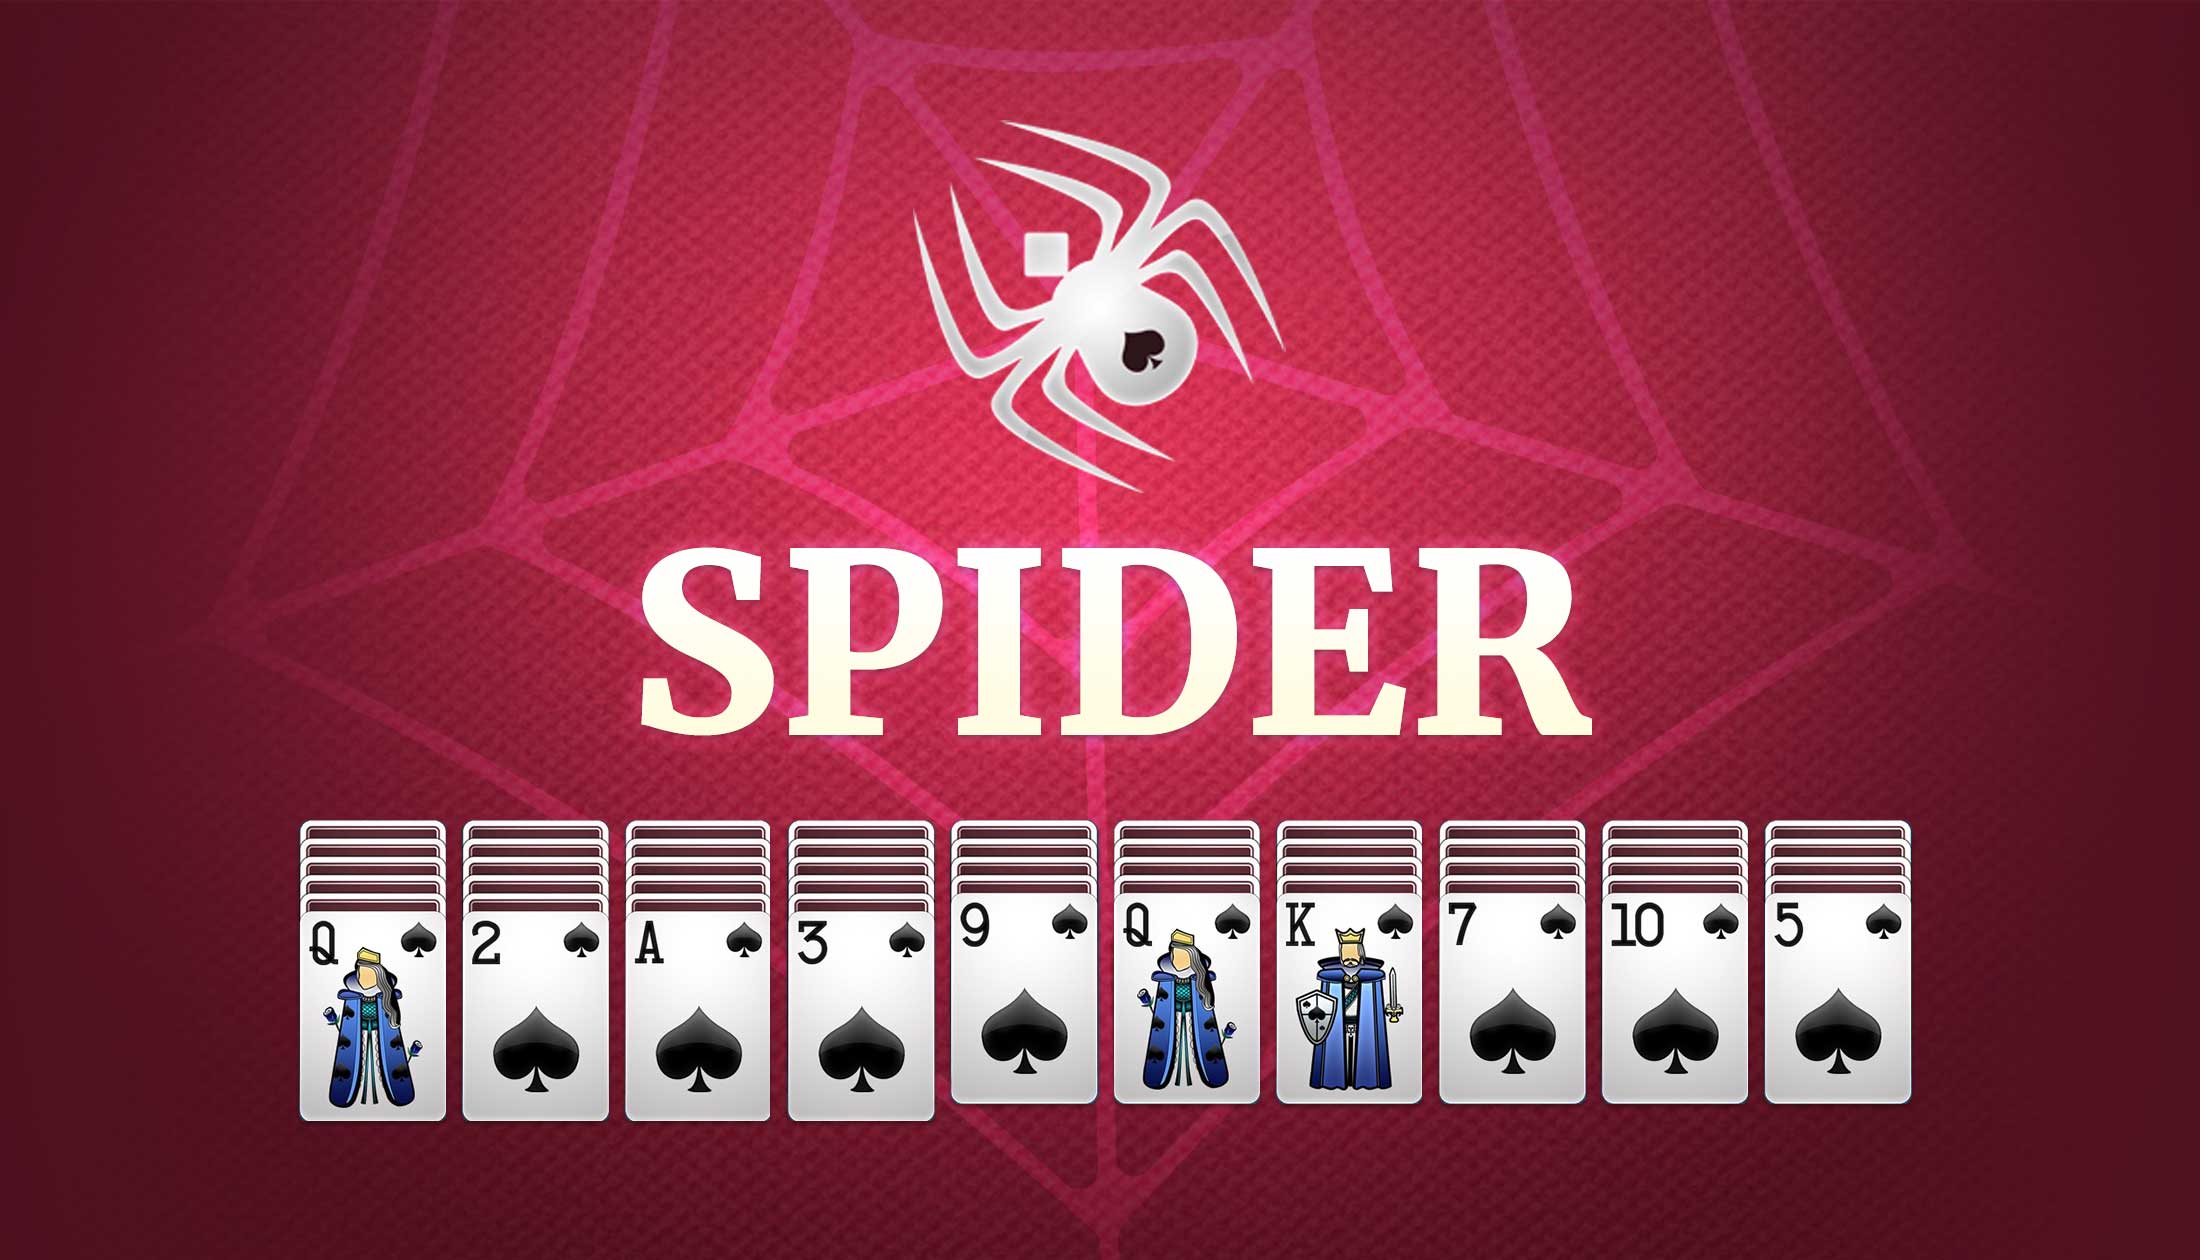 Spider Solitaire - Play Online Game